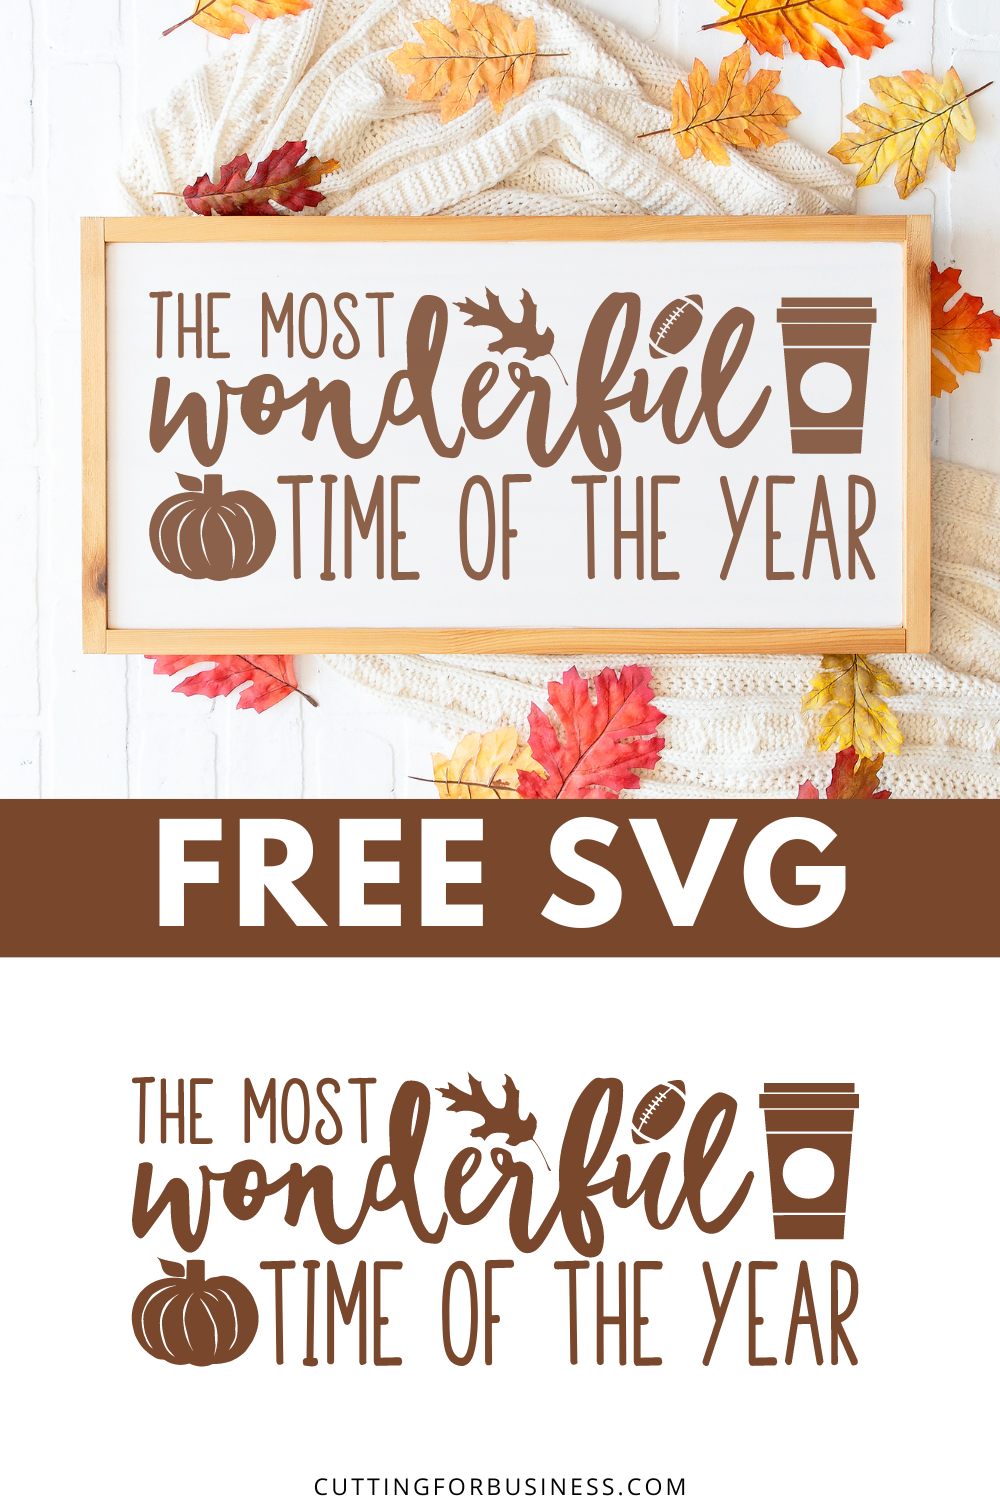 The Most Wonderful Time of the Year SVG - cuttingforbusiness.com